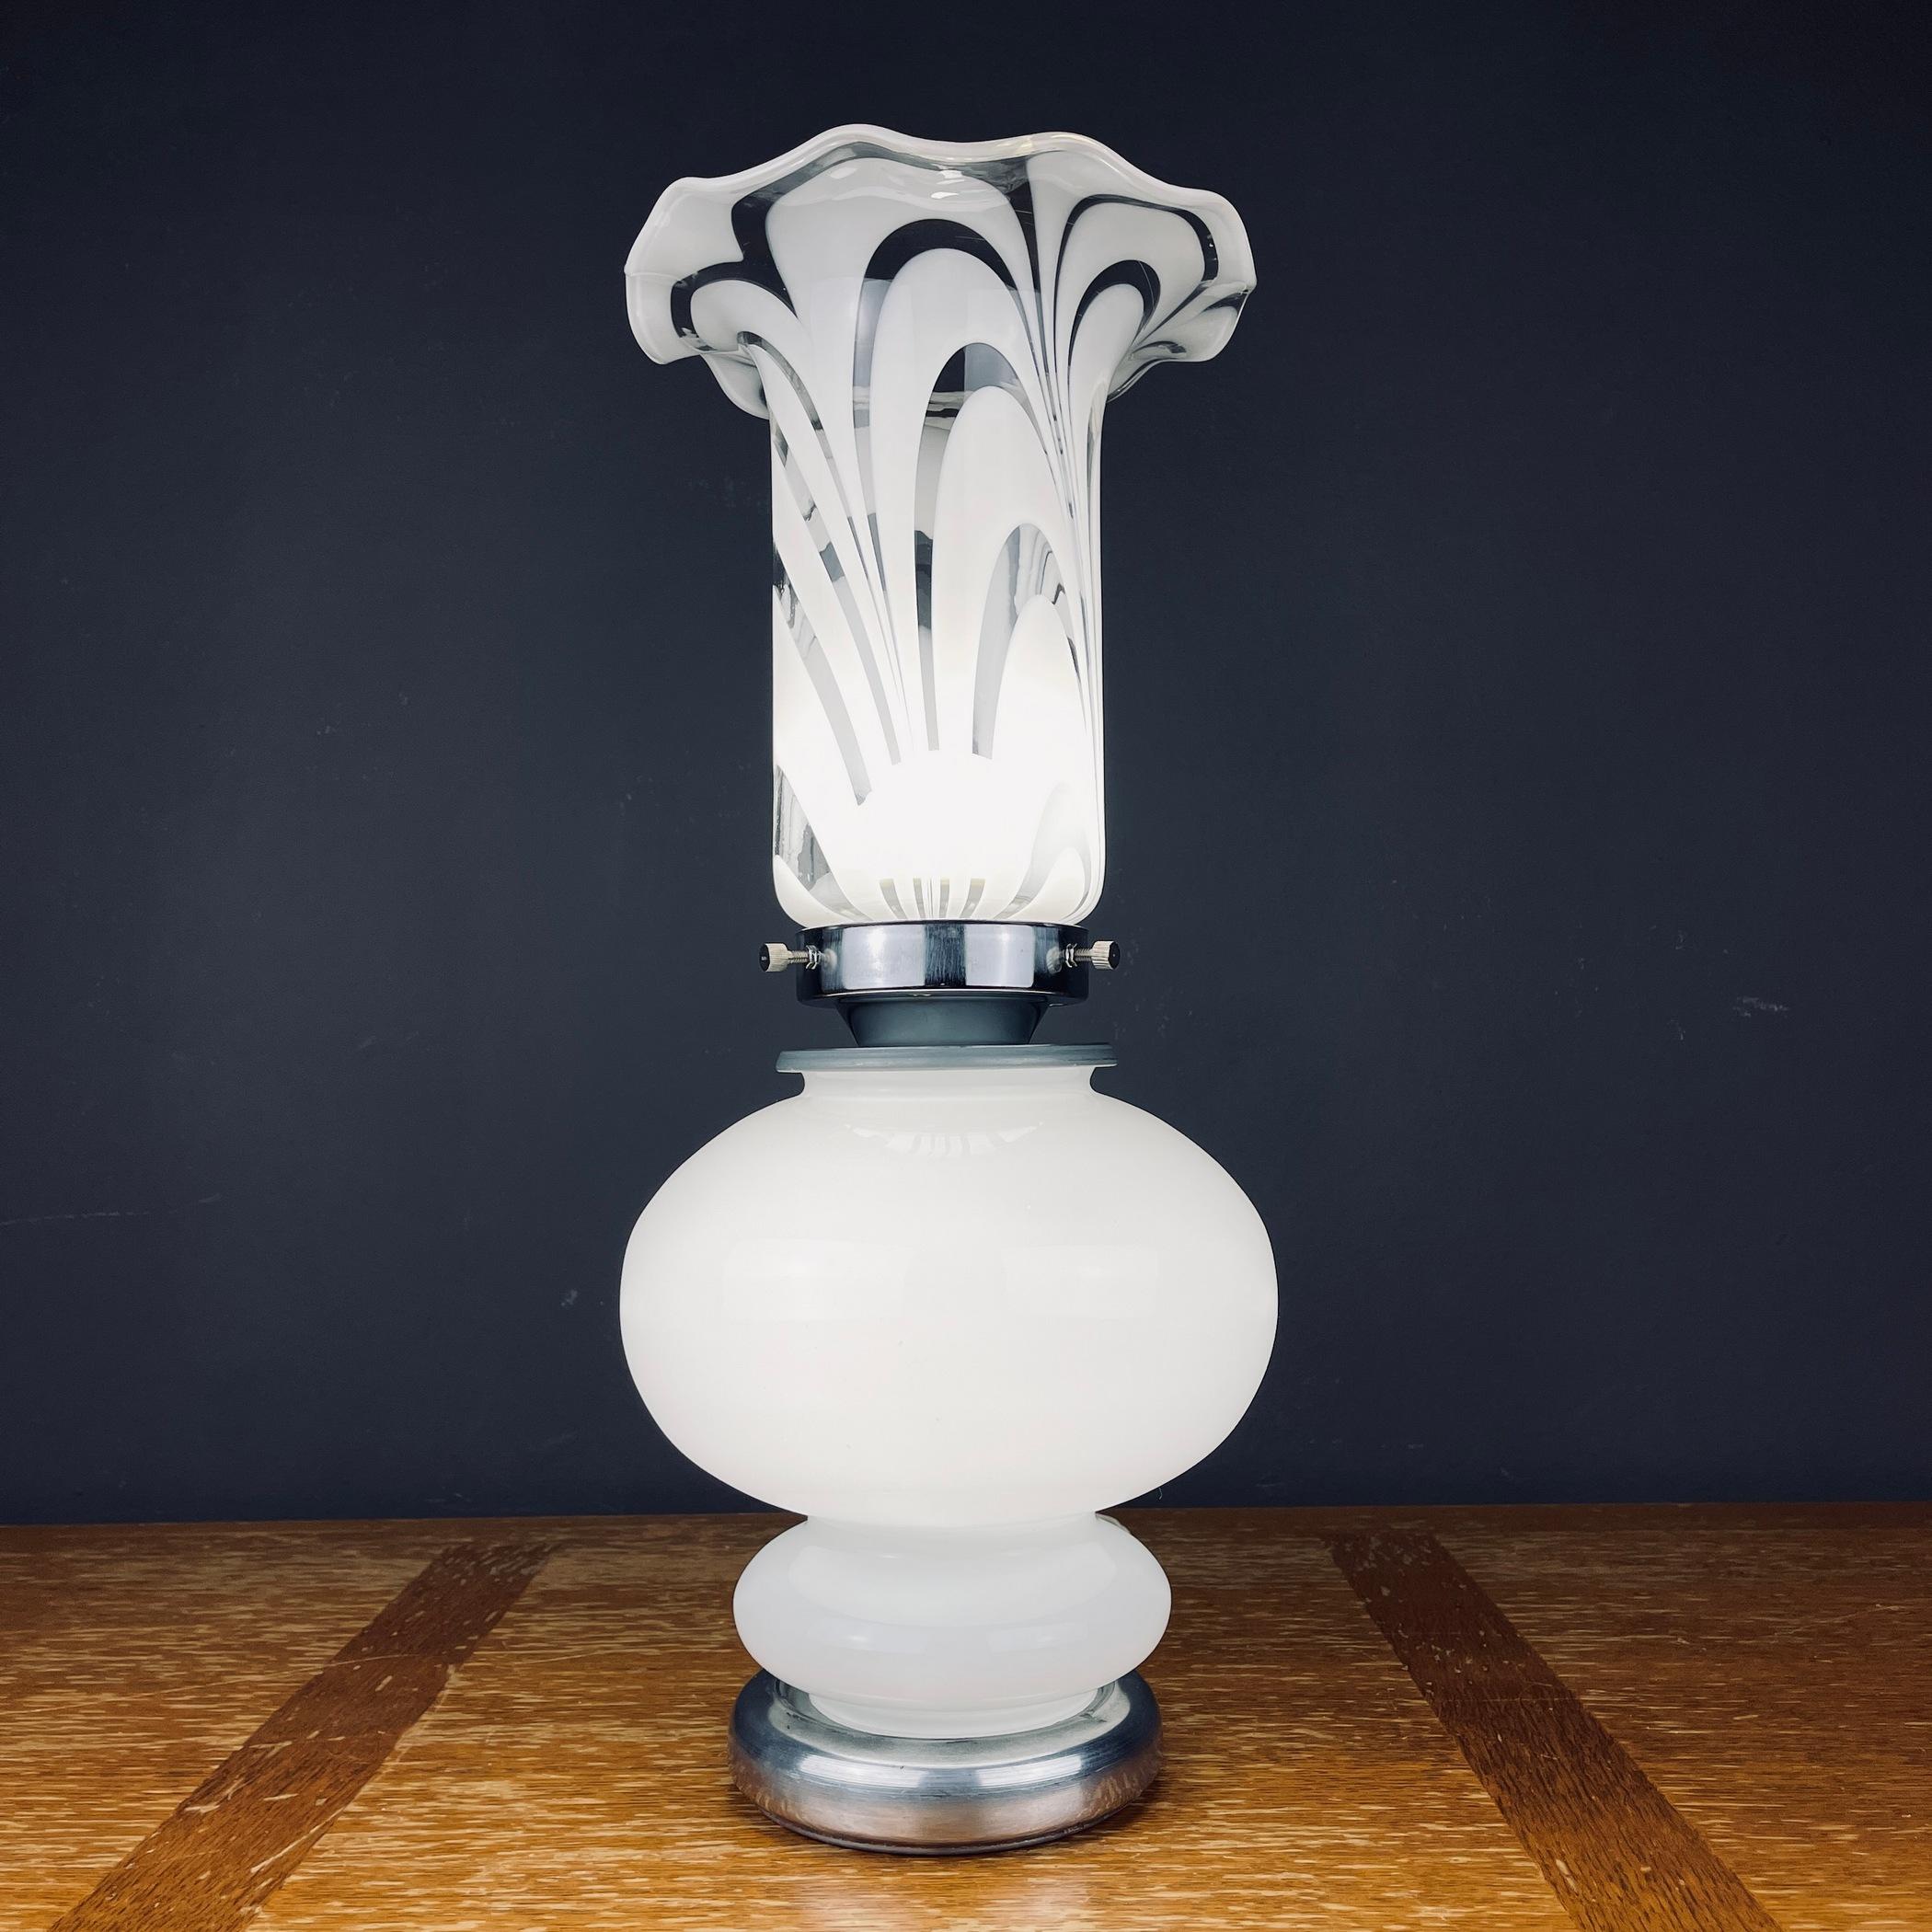 The vintage white glass table lamp was made in Italy in the 1980s. Retro lamp will bring to your home the atmosphere of 70s Italy. A mid-century table lamp will look great in an Art Deco or Mid-Century Modern interior. The lamp is suited for a